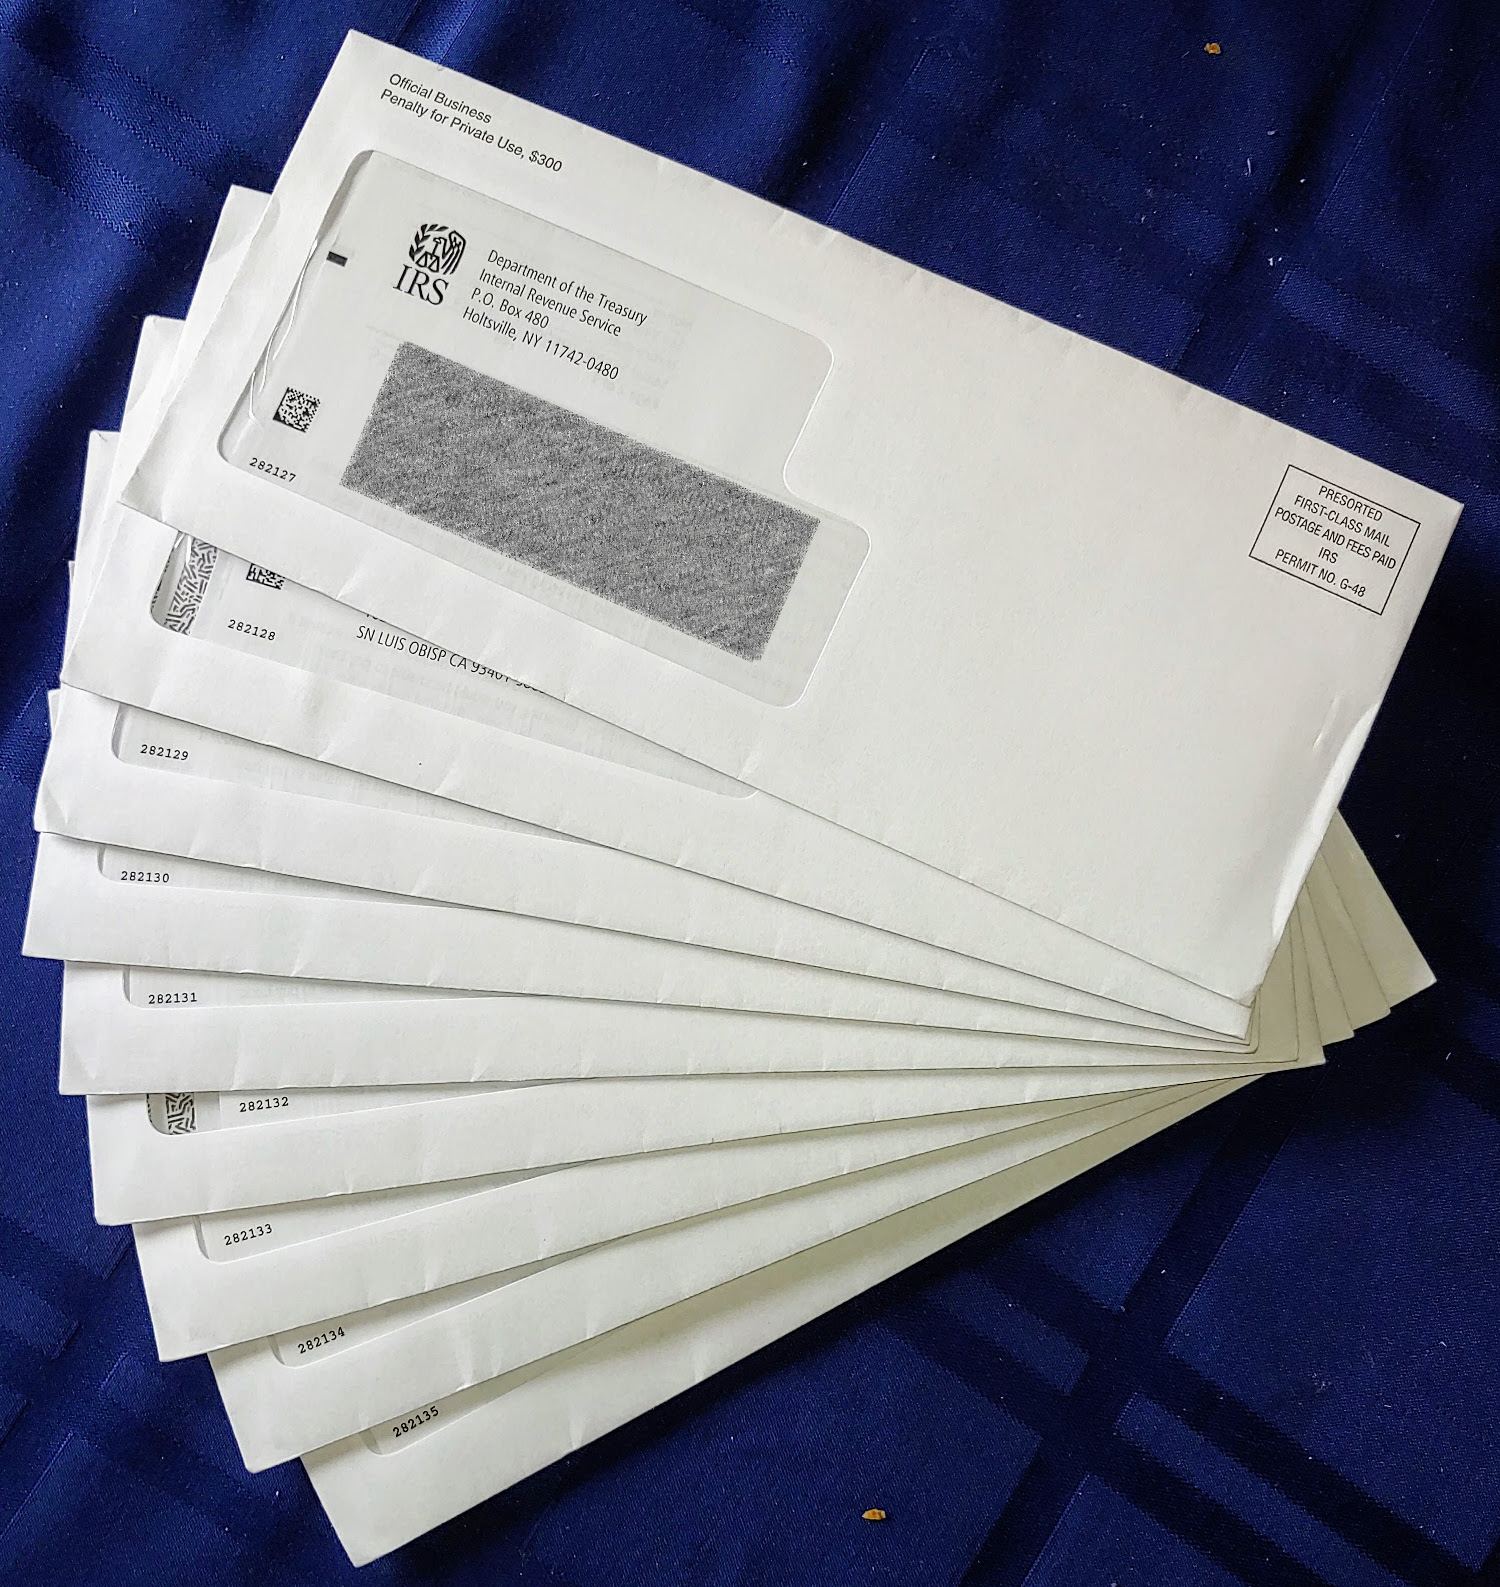 nine envelopes from the I.R.S. stacked